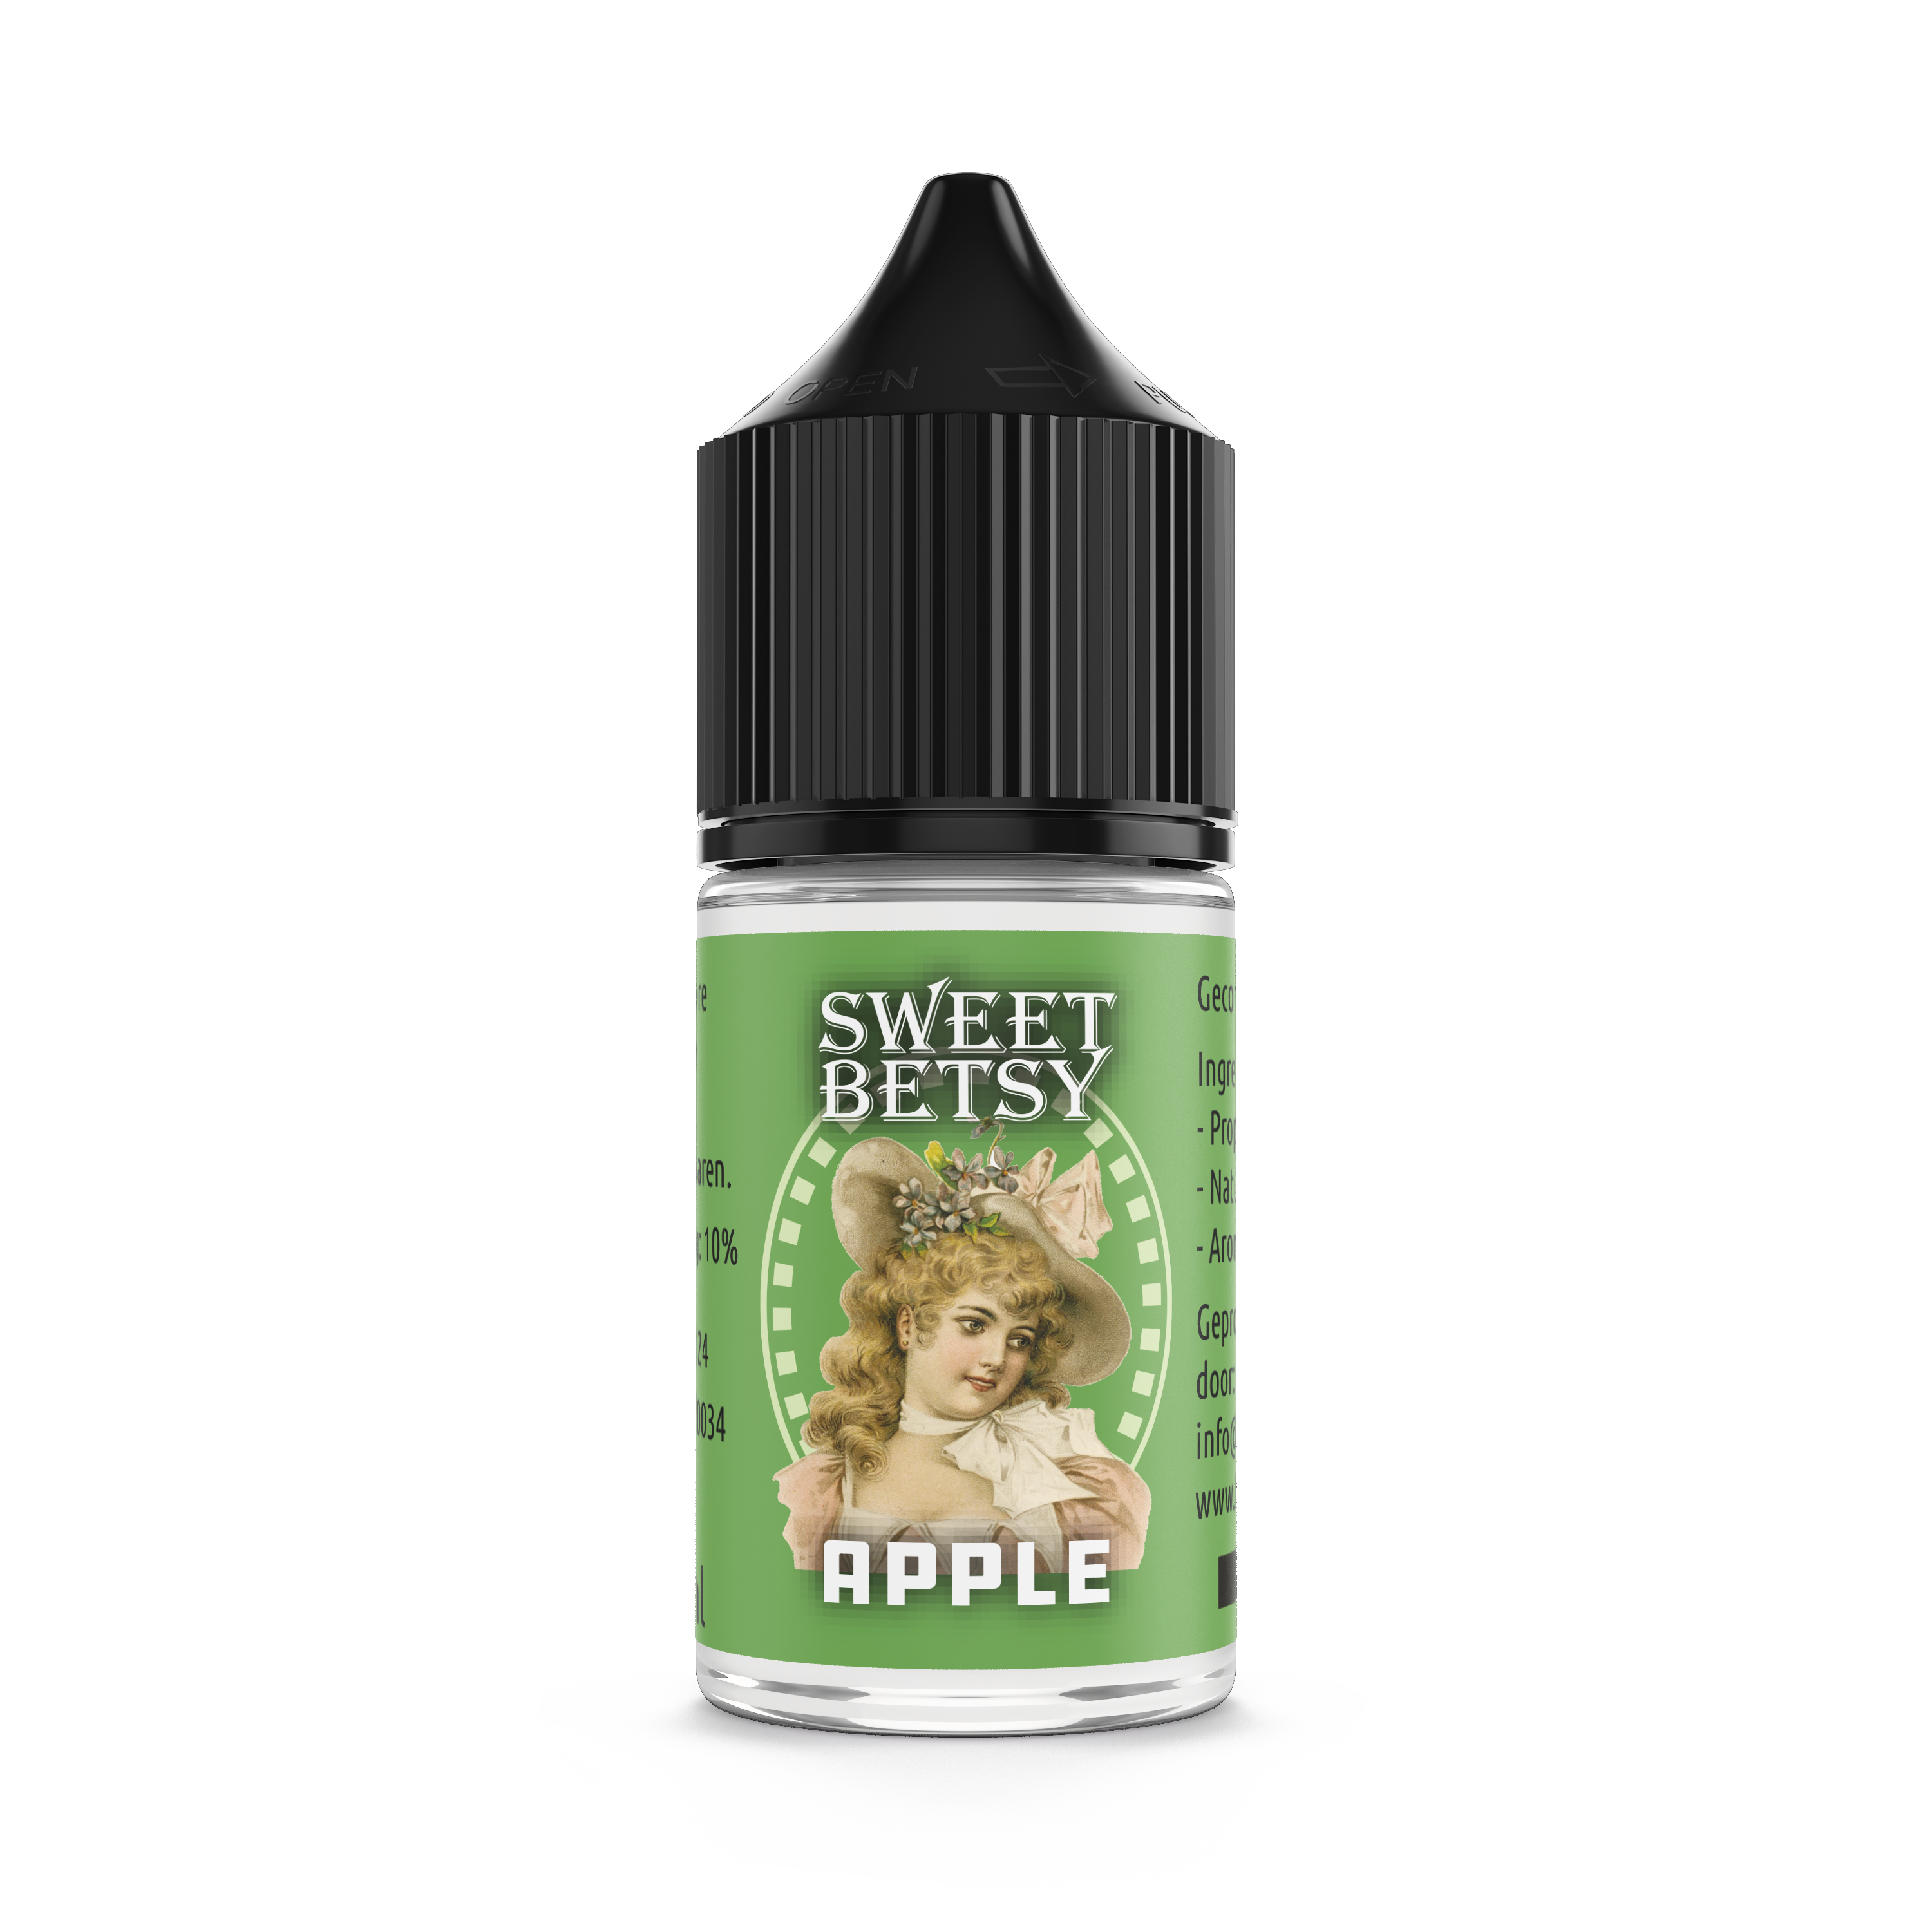 Sweet Betsy Appel aroma - Flavormonks